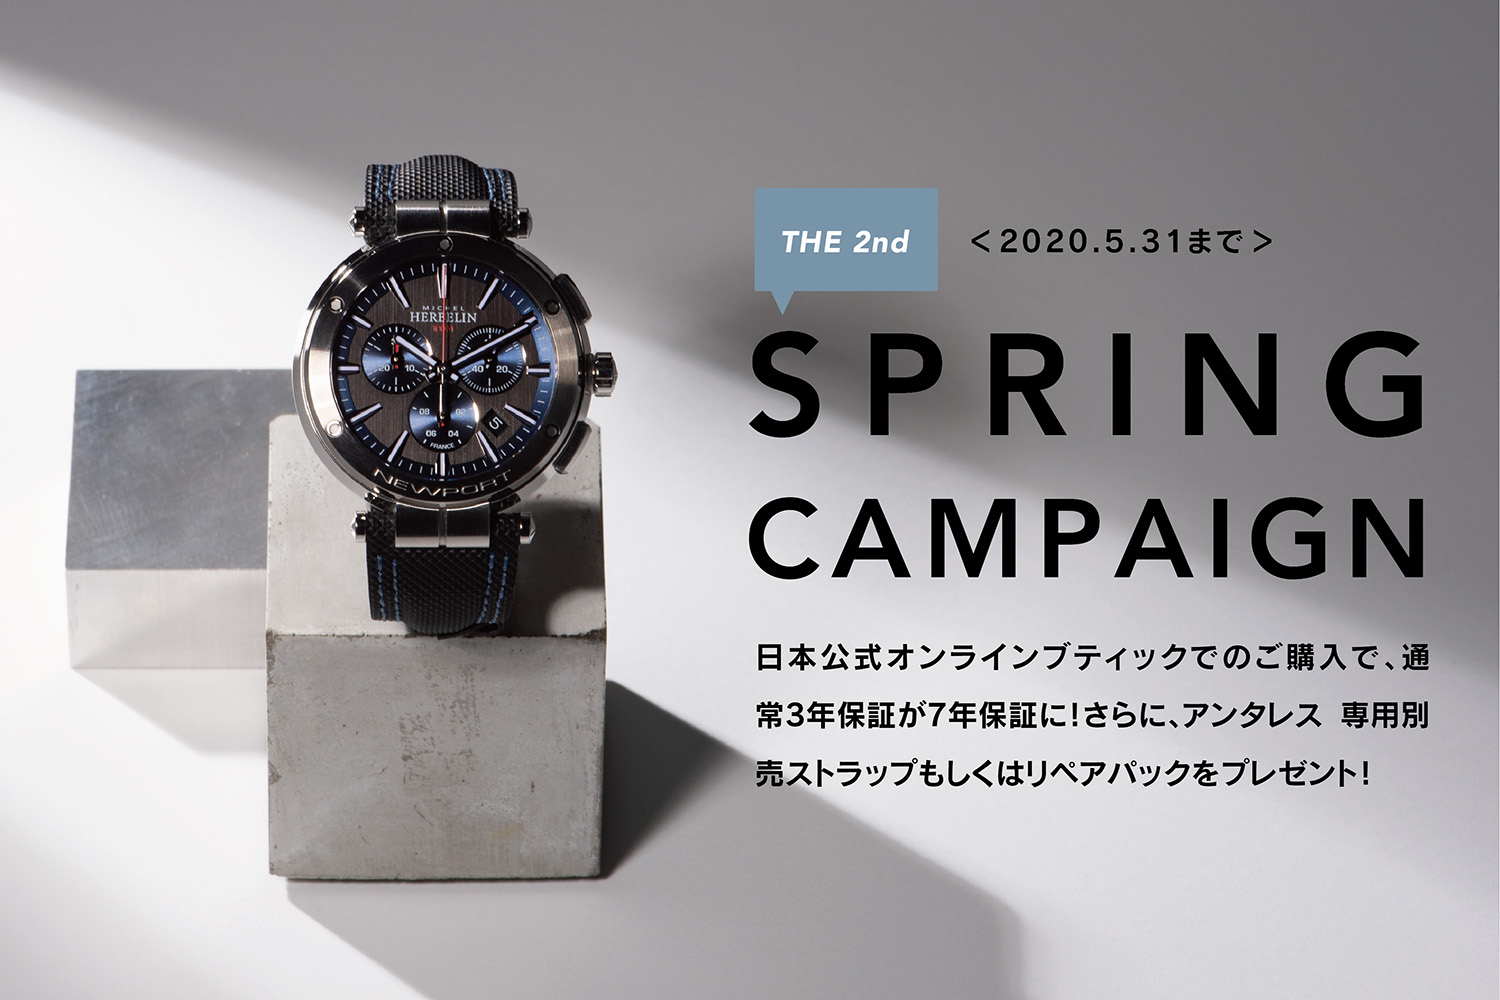 THE 2nd SPRING CAMPAIGN 開催中！